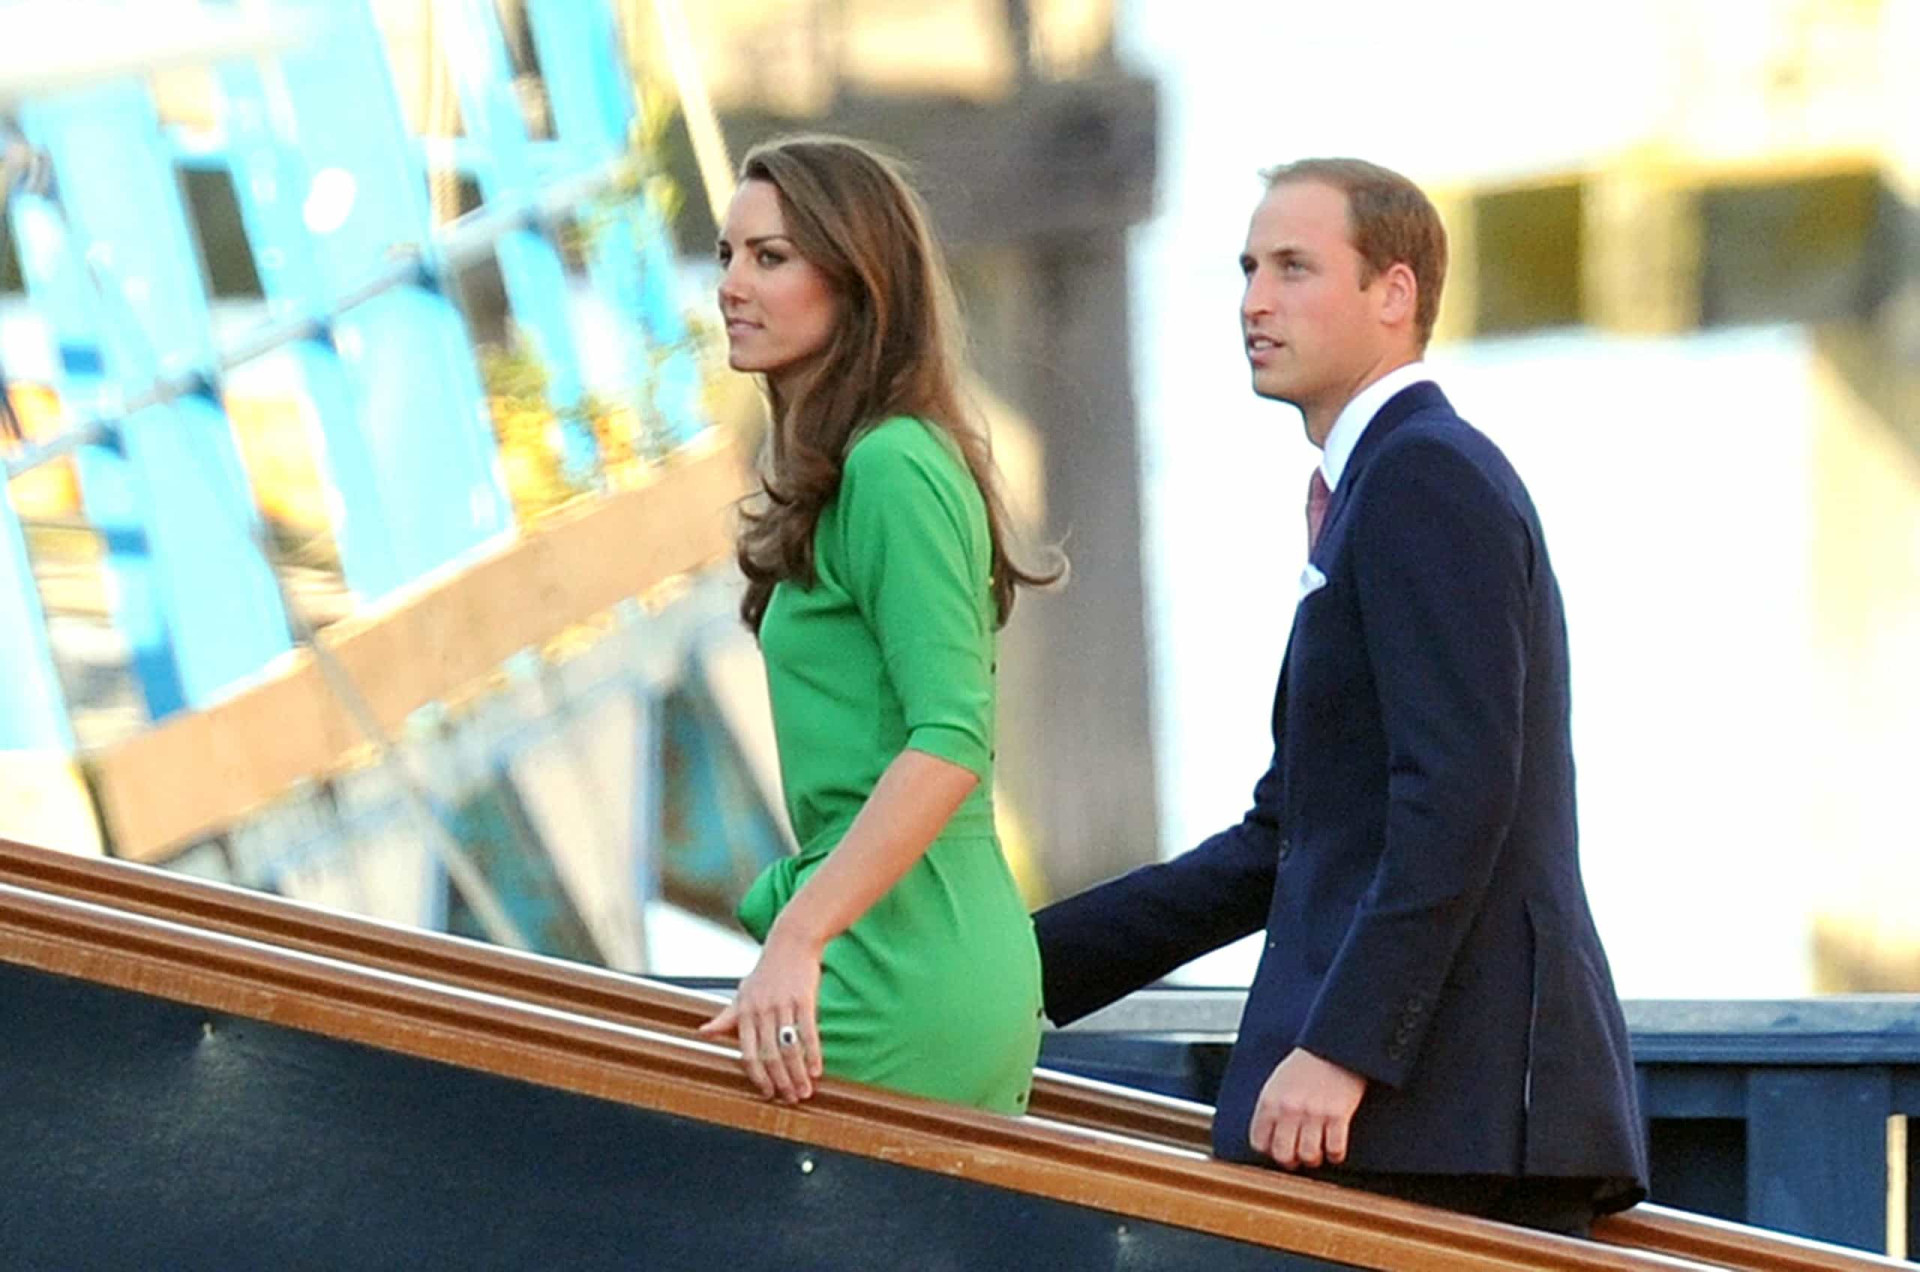 <p><em>Britannia</em> still hosts the occasional royal get-together. Pictured on July 29, 2011 are Kate and William arriving for an evening reception onboard the royal yacht to celebrate the impending wedding of Zara Phillips (the eldest granddaughter of Queen Elizabeth II) and Mike Tindall.</p><p><a href="https://www.msn.com/en-us/community/channel/vid-7xx8mnucu55yw63we9va2gwr7uihbxwc68fxqp25x6tg4ftibpra?cvid=94631541bc0f4f89bfd59158d696ad7e">Follow us and access great exclusive content every day</a></p>